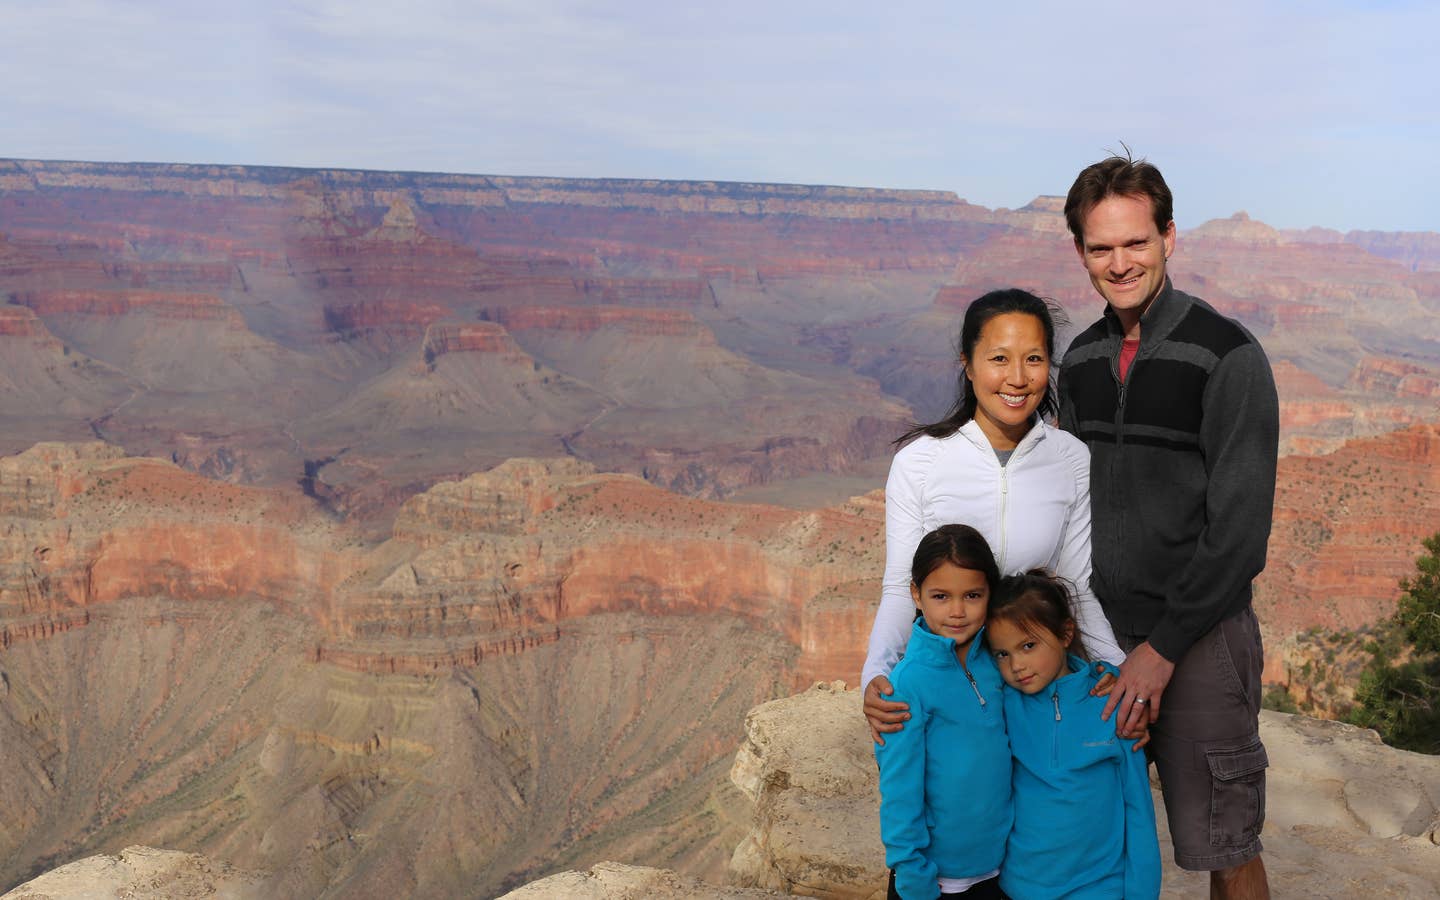 A woman, man and two young girls pose in front of the Grand Canyon wearing light jackets.